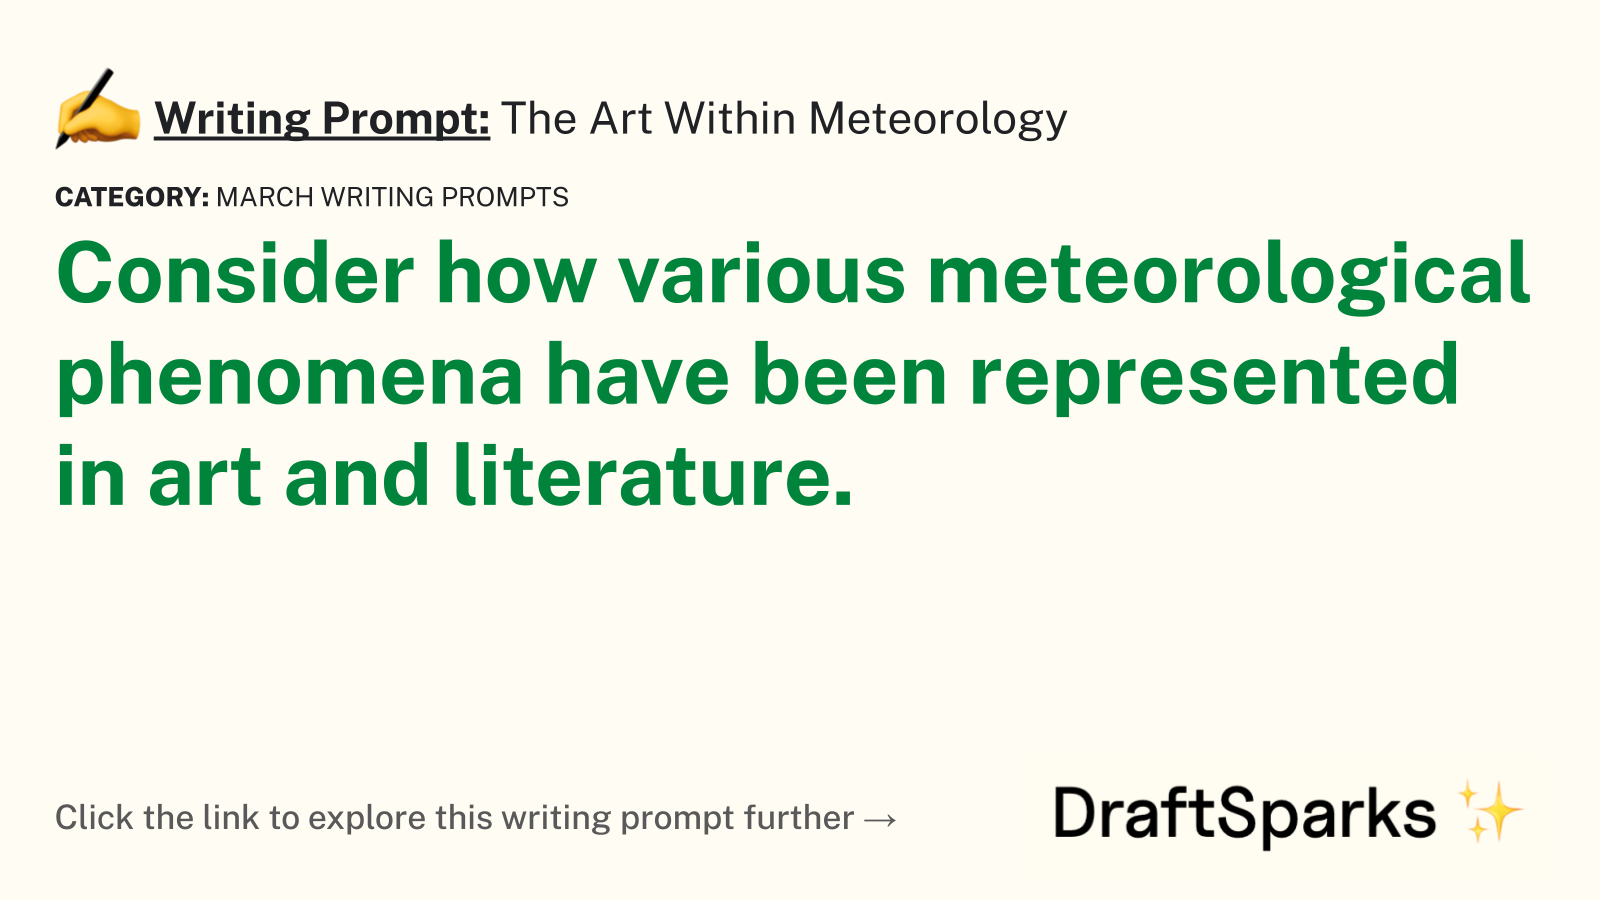 The Art Within Meteorology